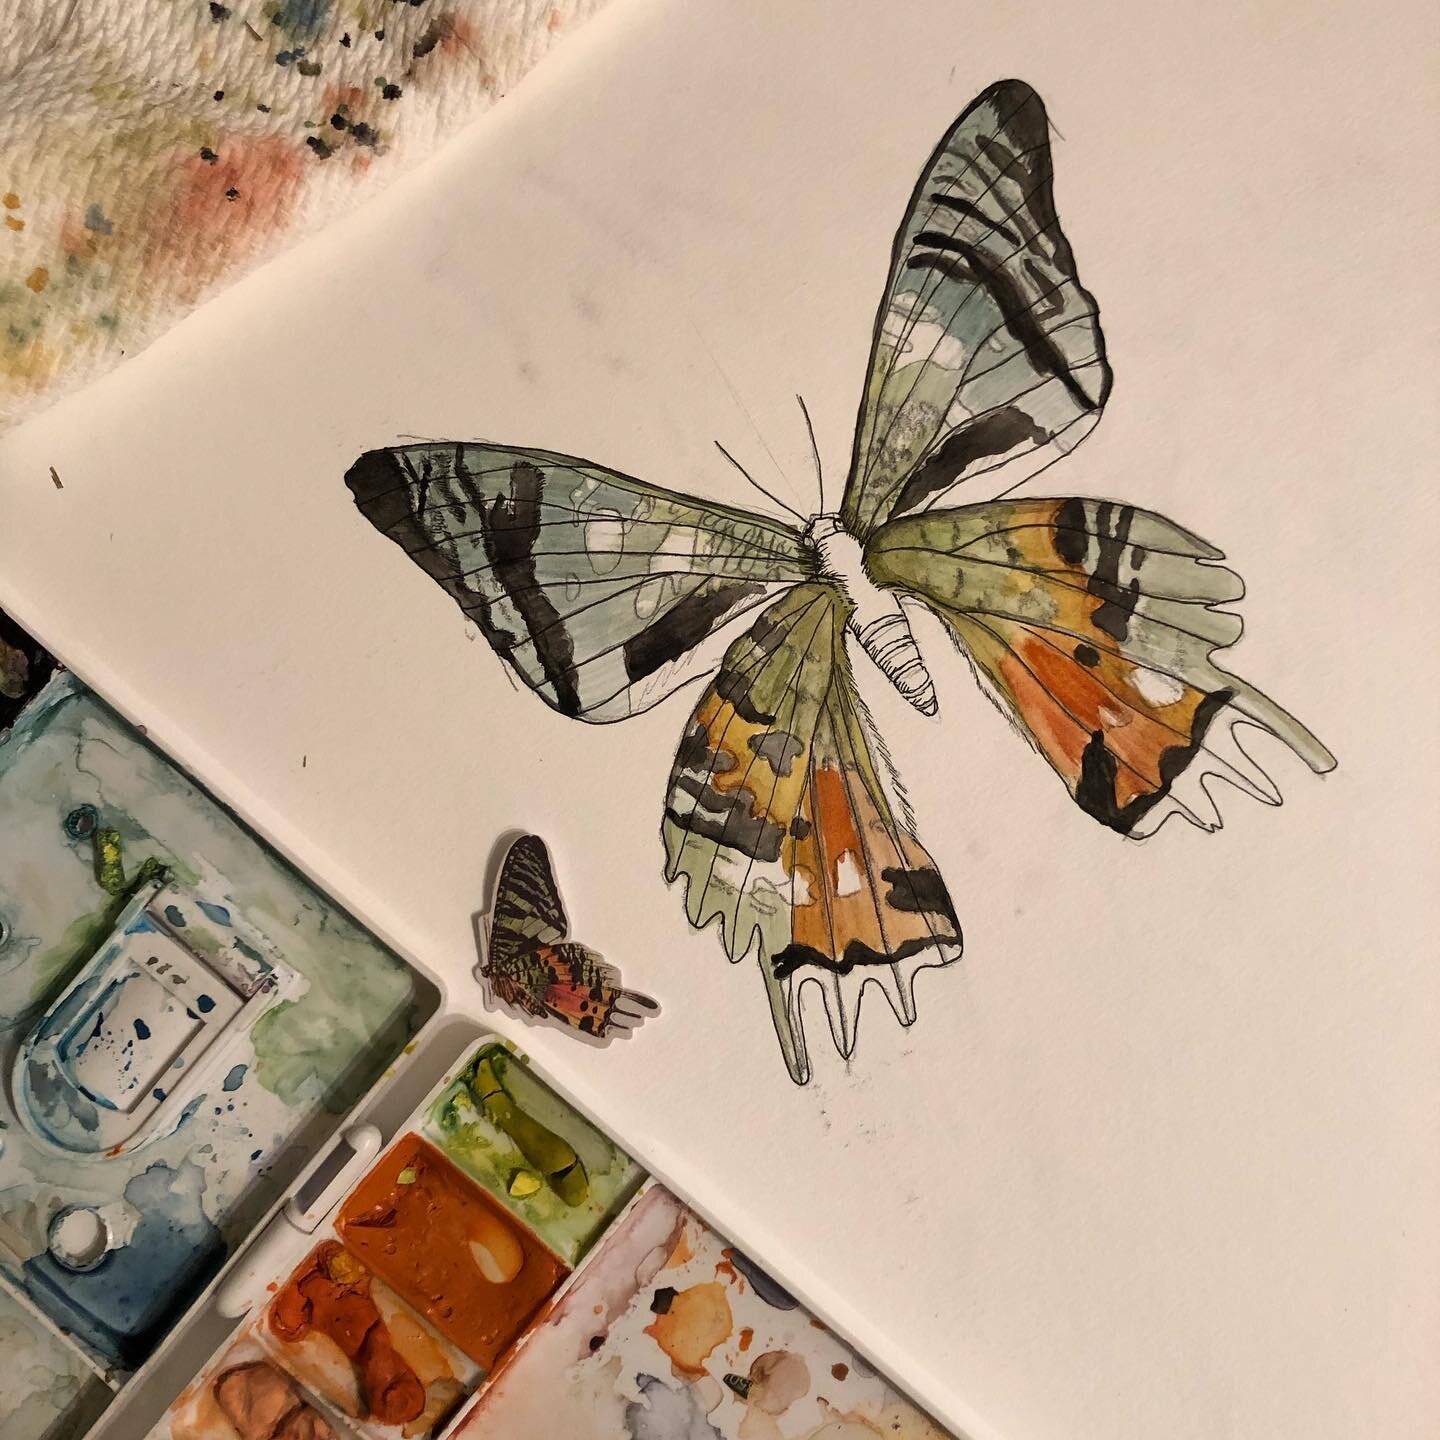 Working on a Madagascar Sunset Moth. 

What flora should go with it? Thinking a Swiss cheese monstera?